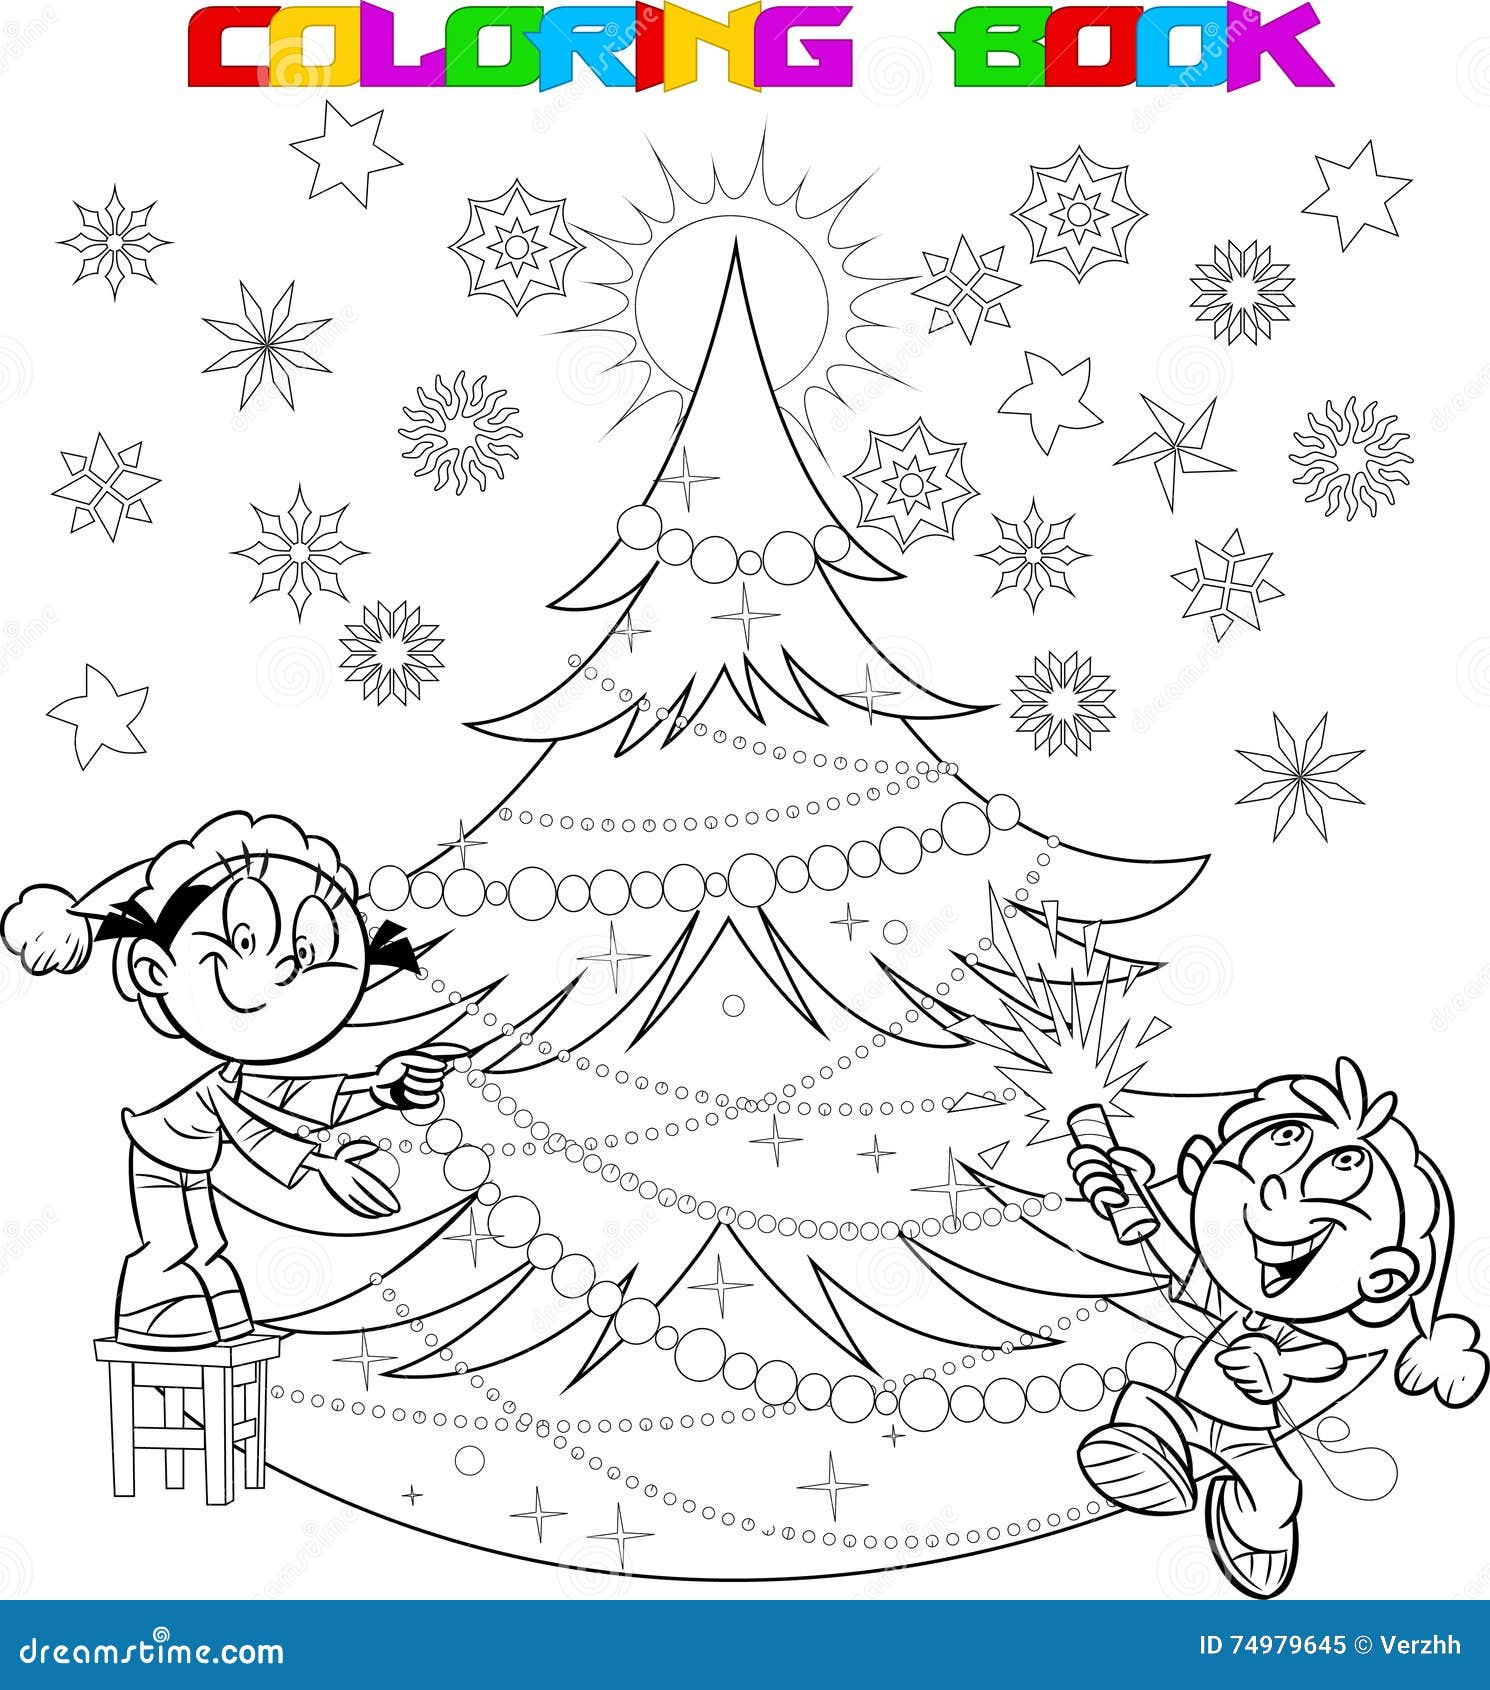 Children decorate the Christmas tree royalty free illustration